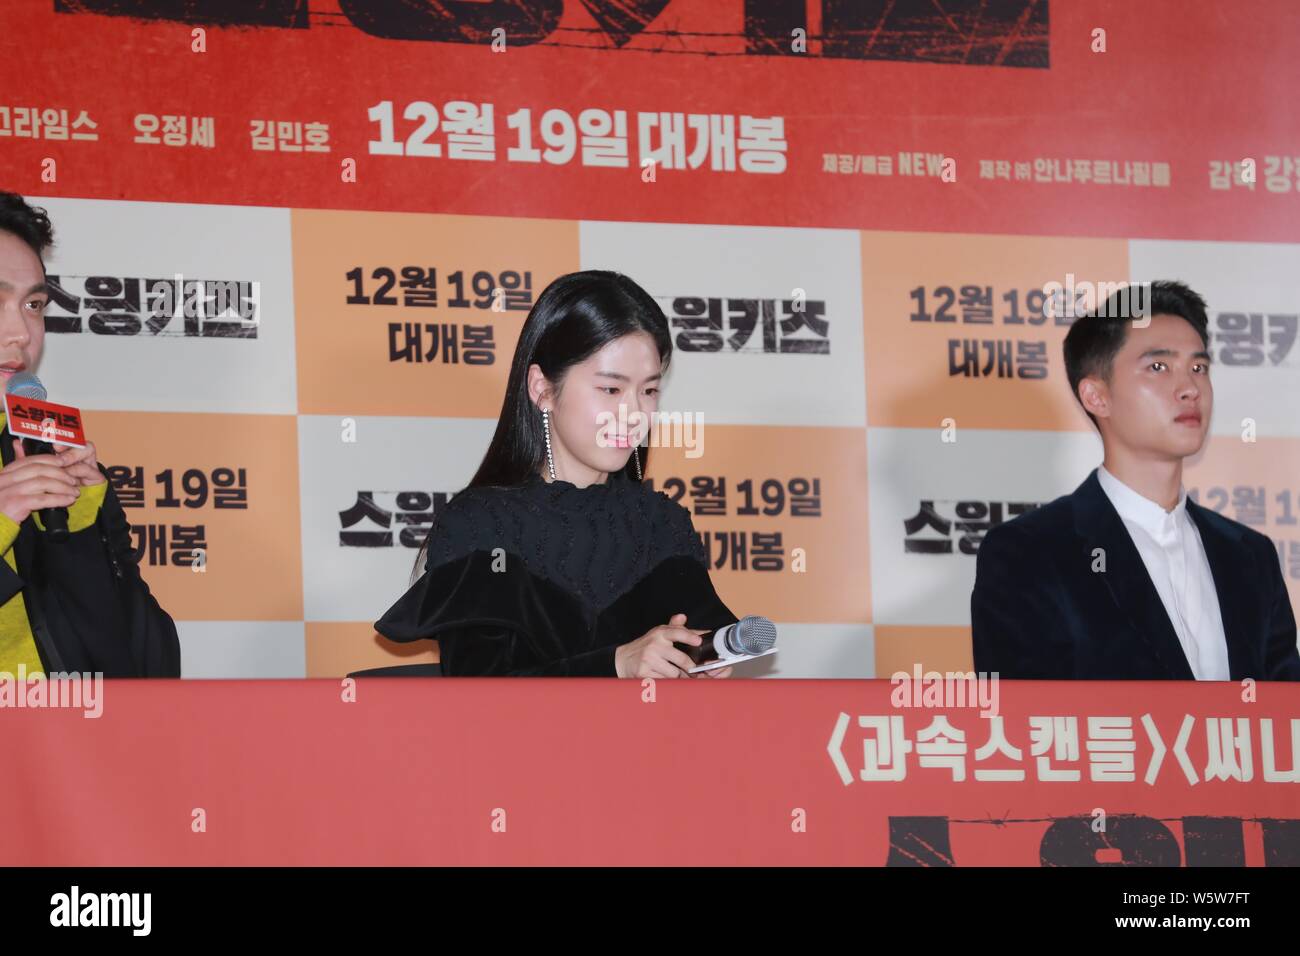 (From left) South Korean actor Oh Jung-se, actress and singer Park Hye-su, and Singer and actor Do Kyung-soo, better known by his stage name D.O., of Stock Photo